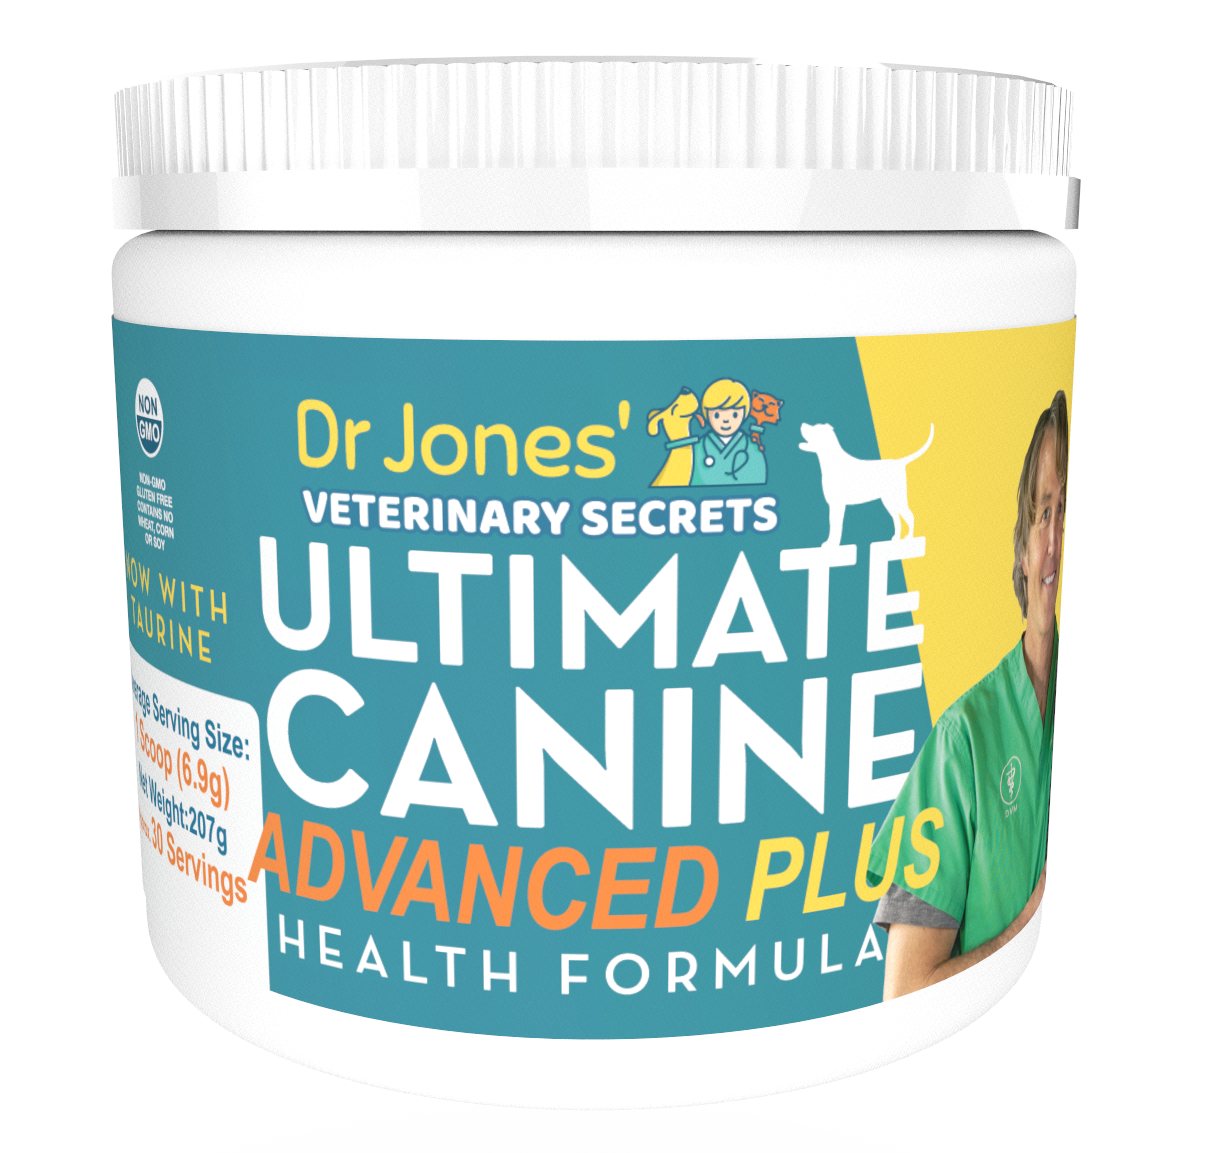 Dr. Jones' Ultimate Canine Advanced Plus Nutritional Supplement for Dogs